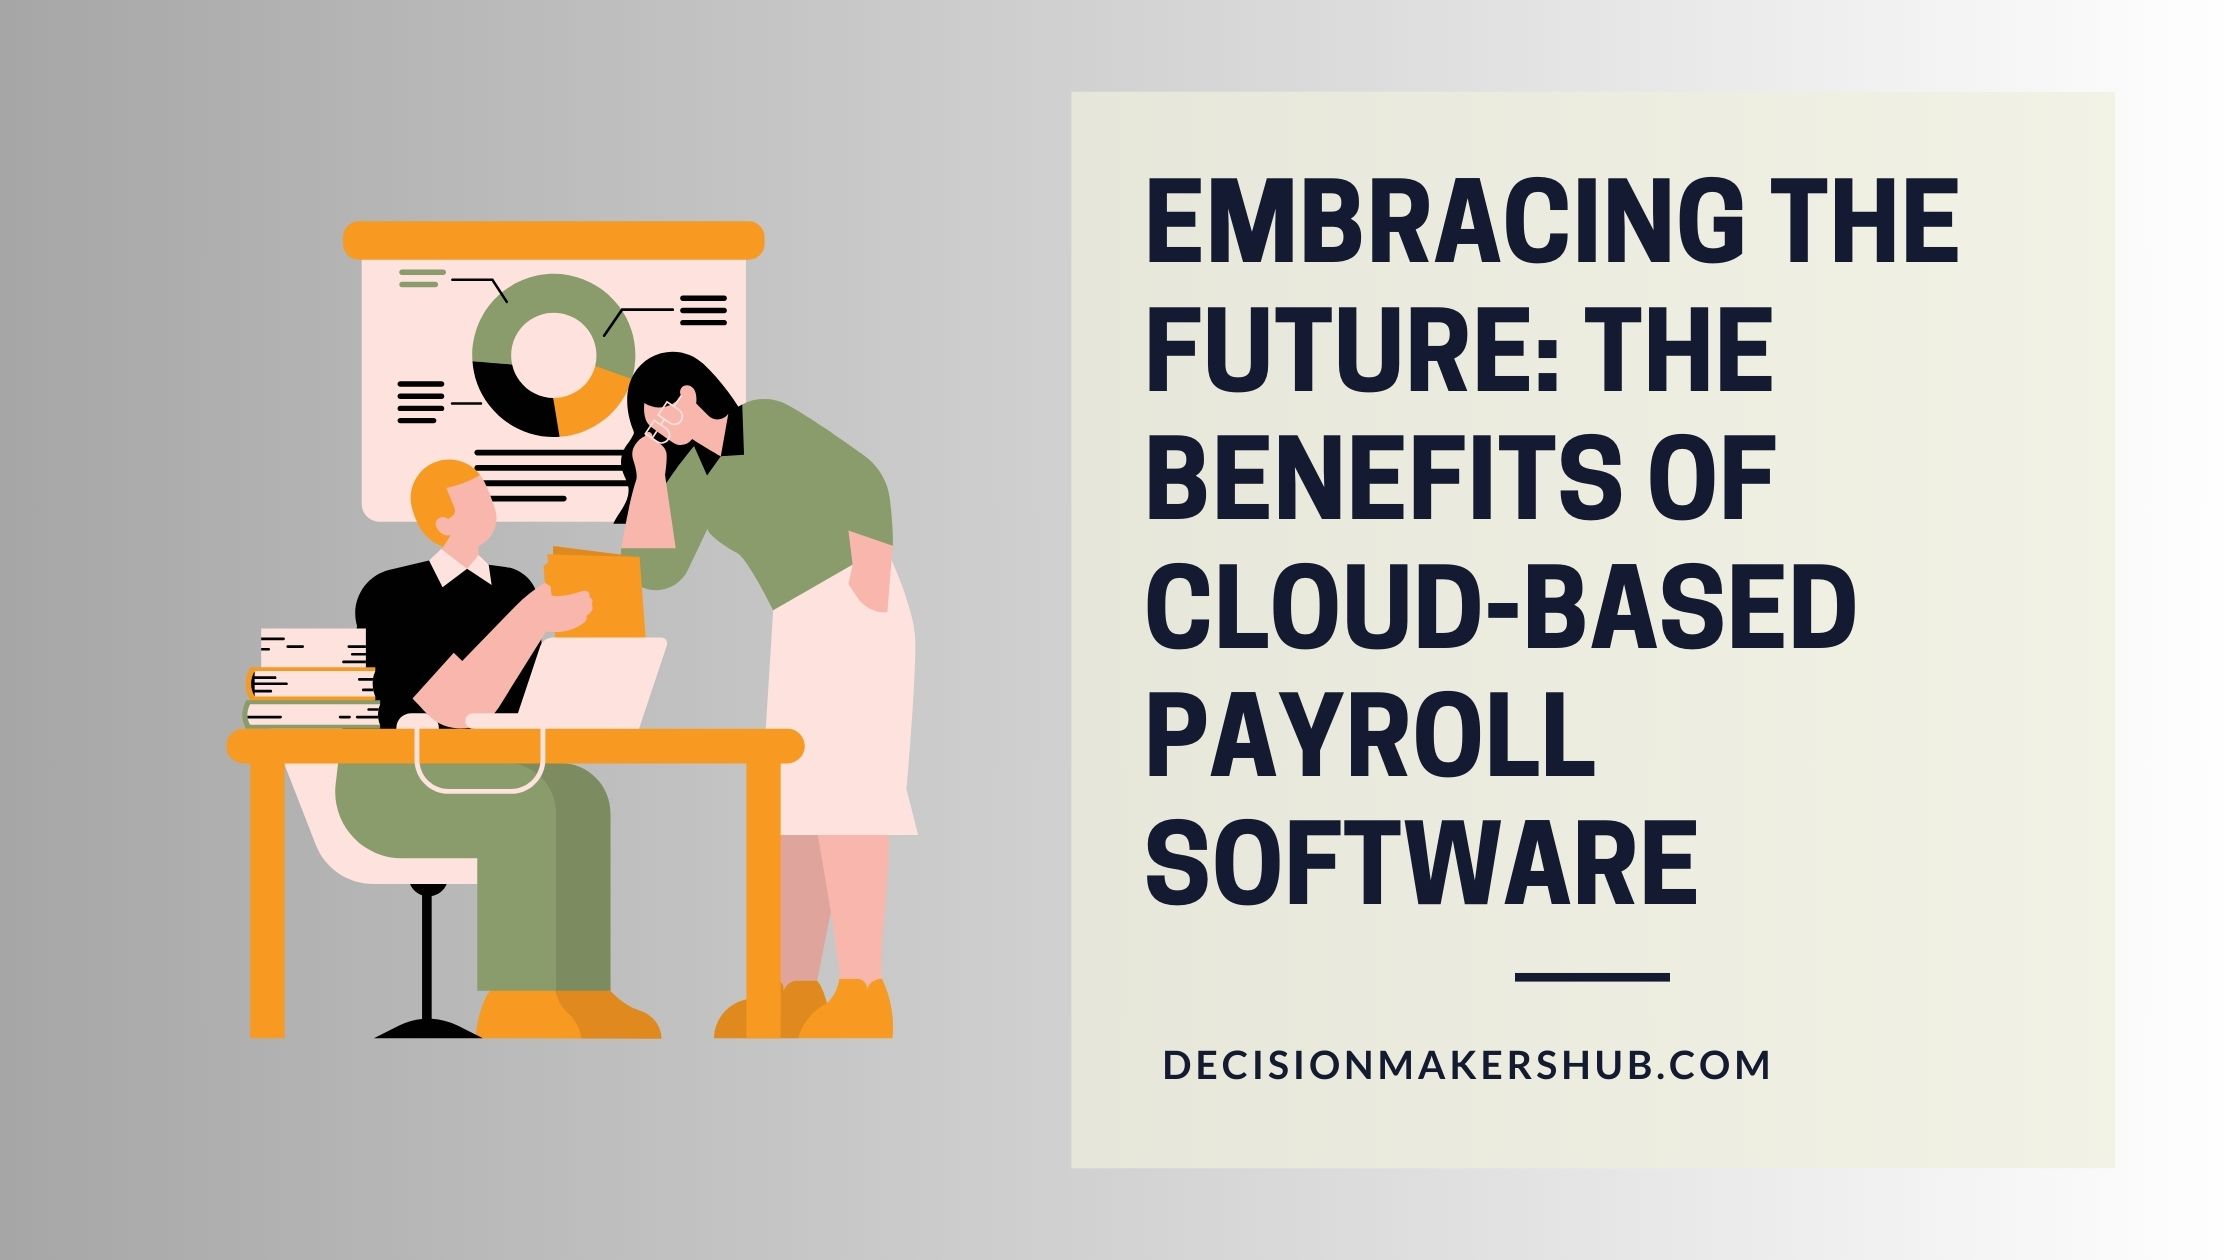 Embracing the Future The Benefits of Cloud-Based Payroll Software